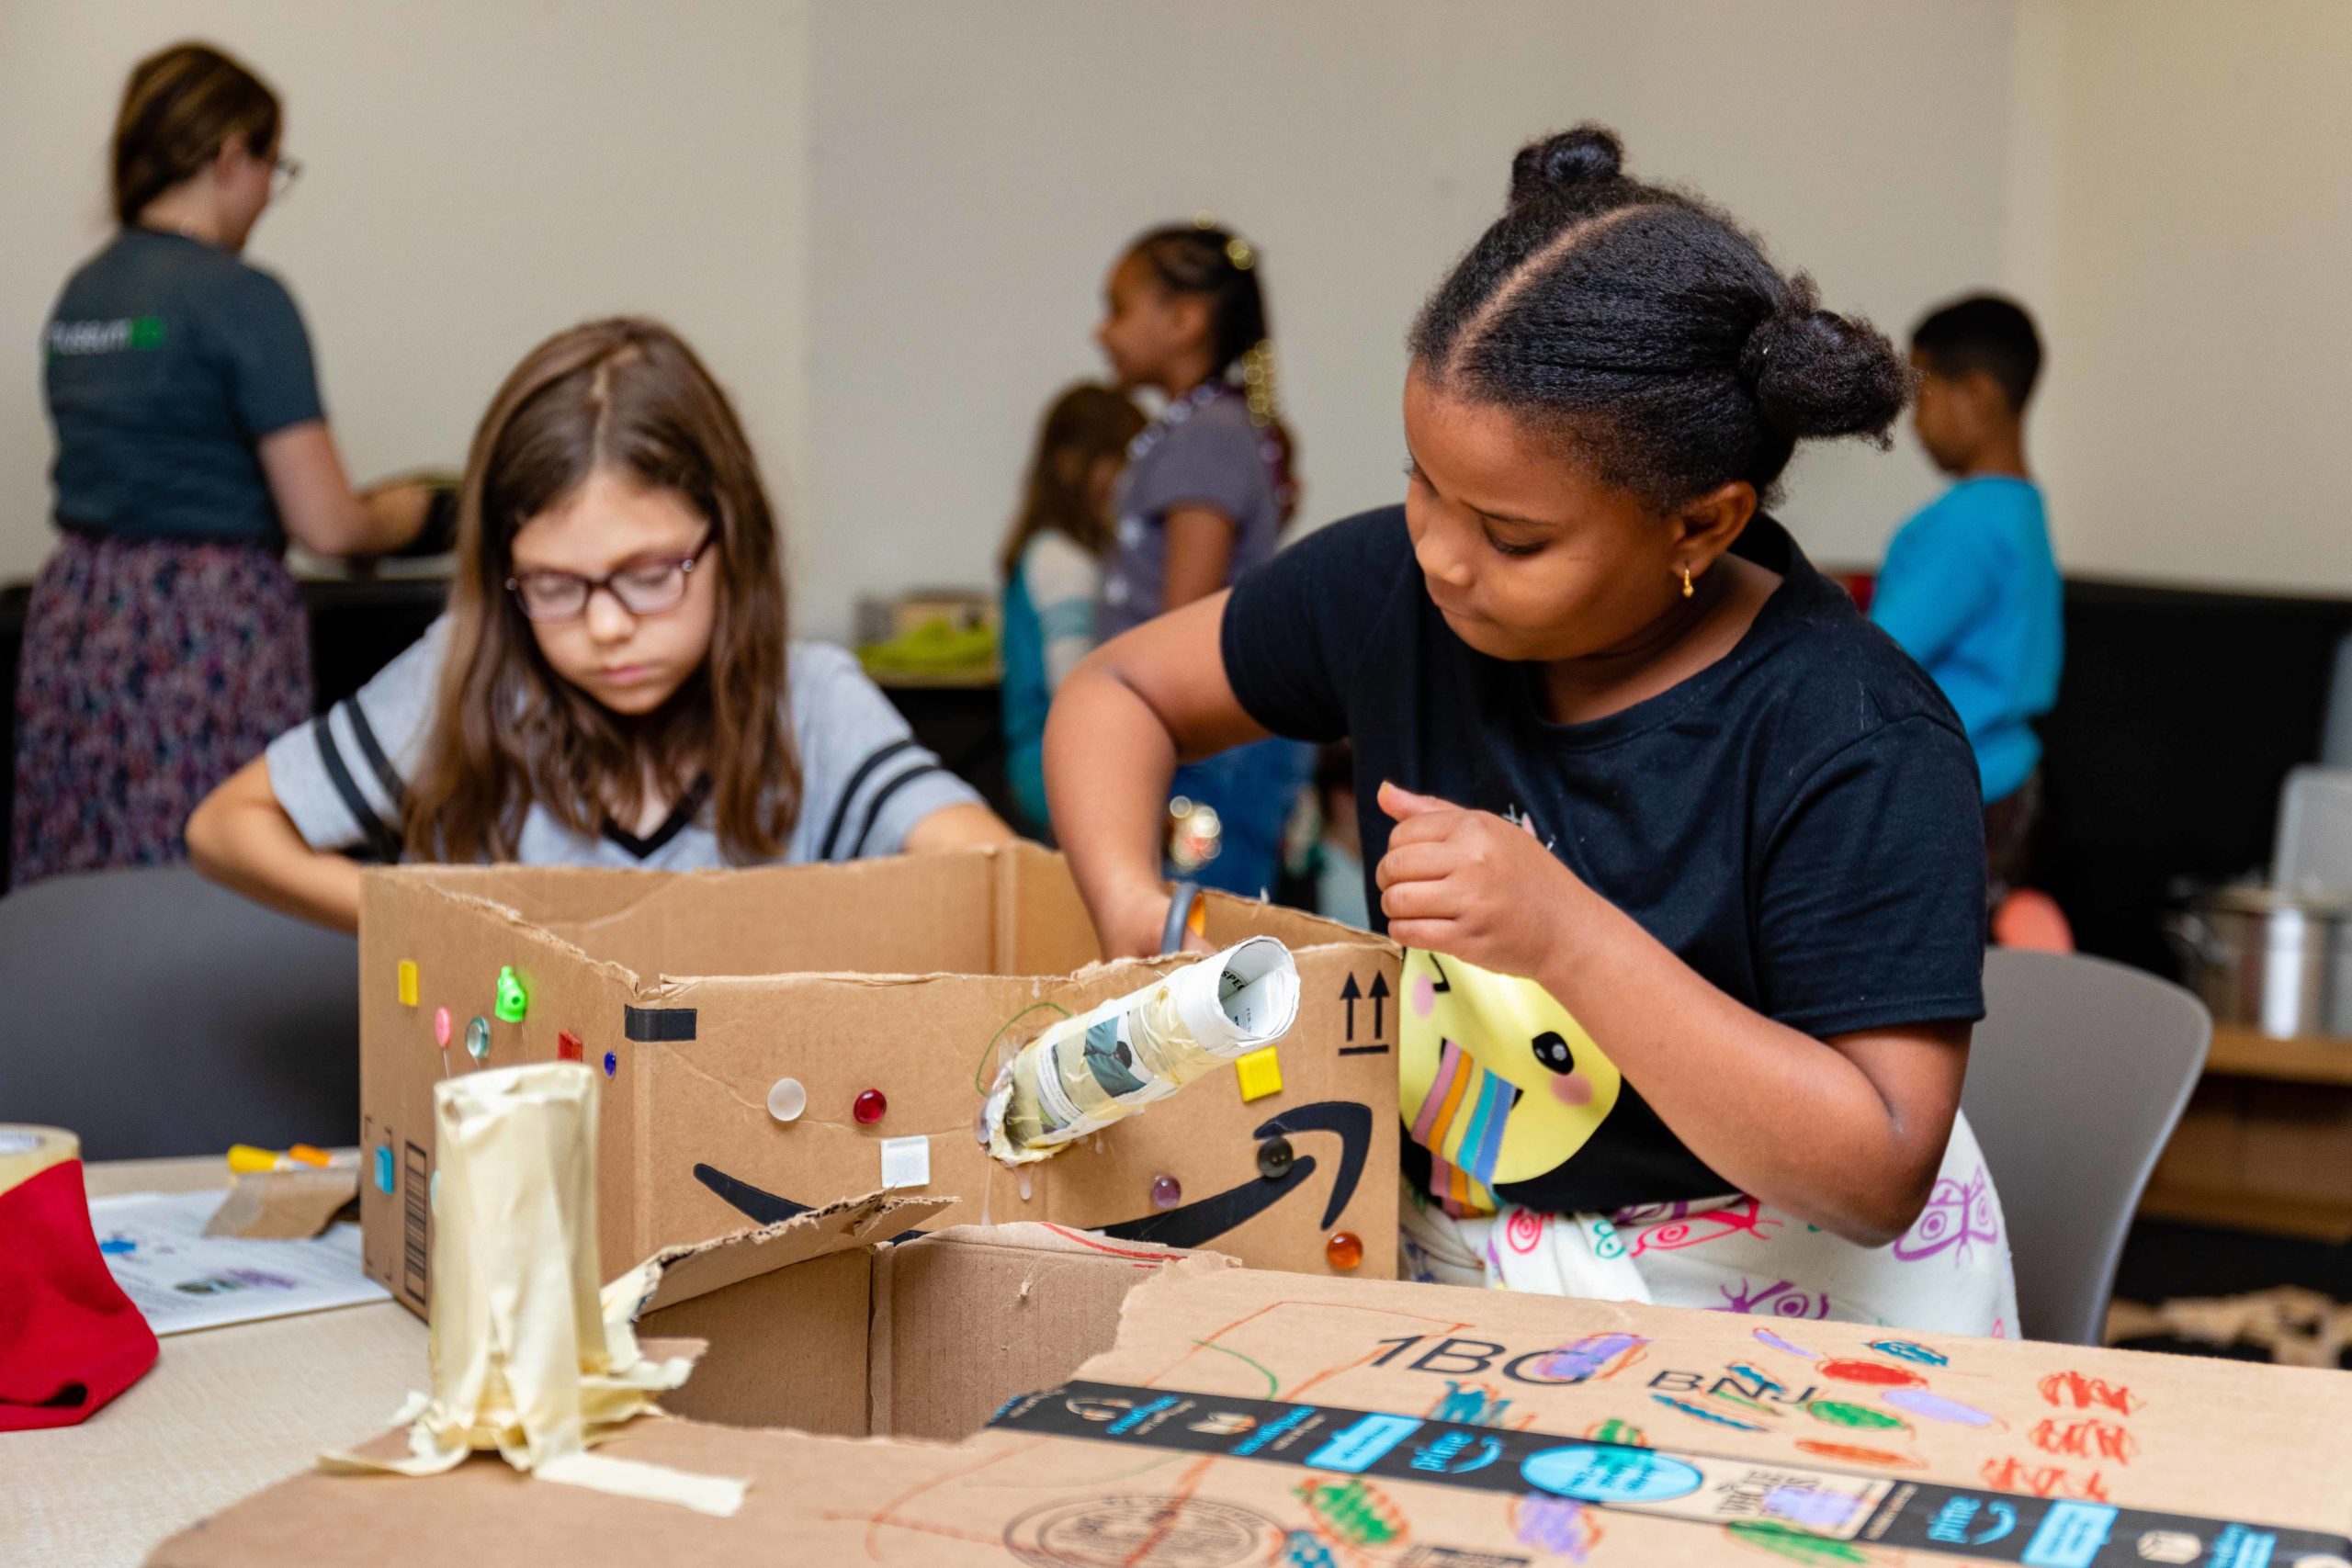 A child works on a creation made of a box, cardboard tubes, buttons, and other familiar materials. There are other children and a museum educator in the background working on their projects.